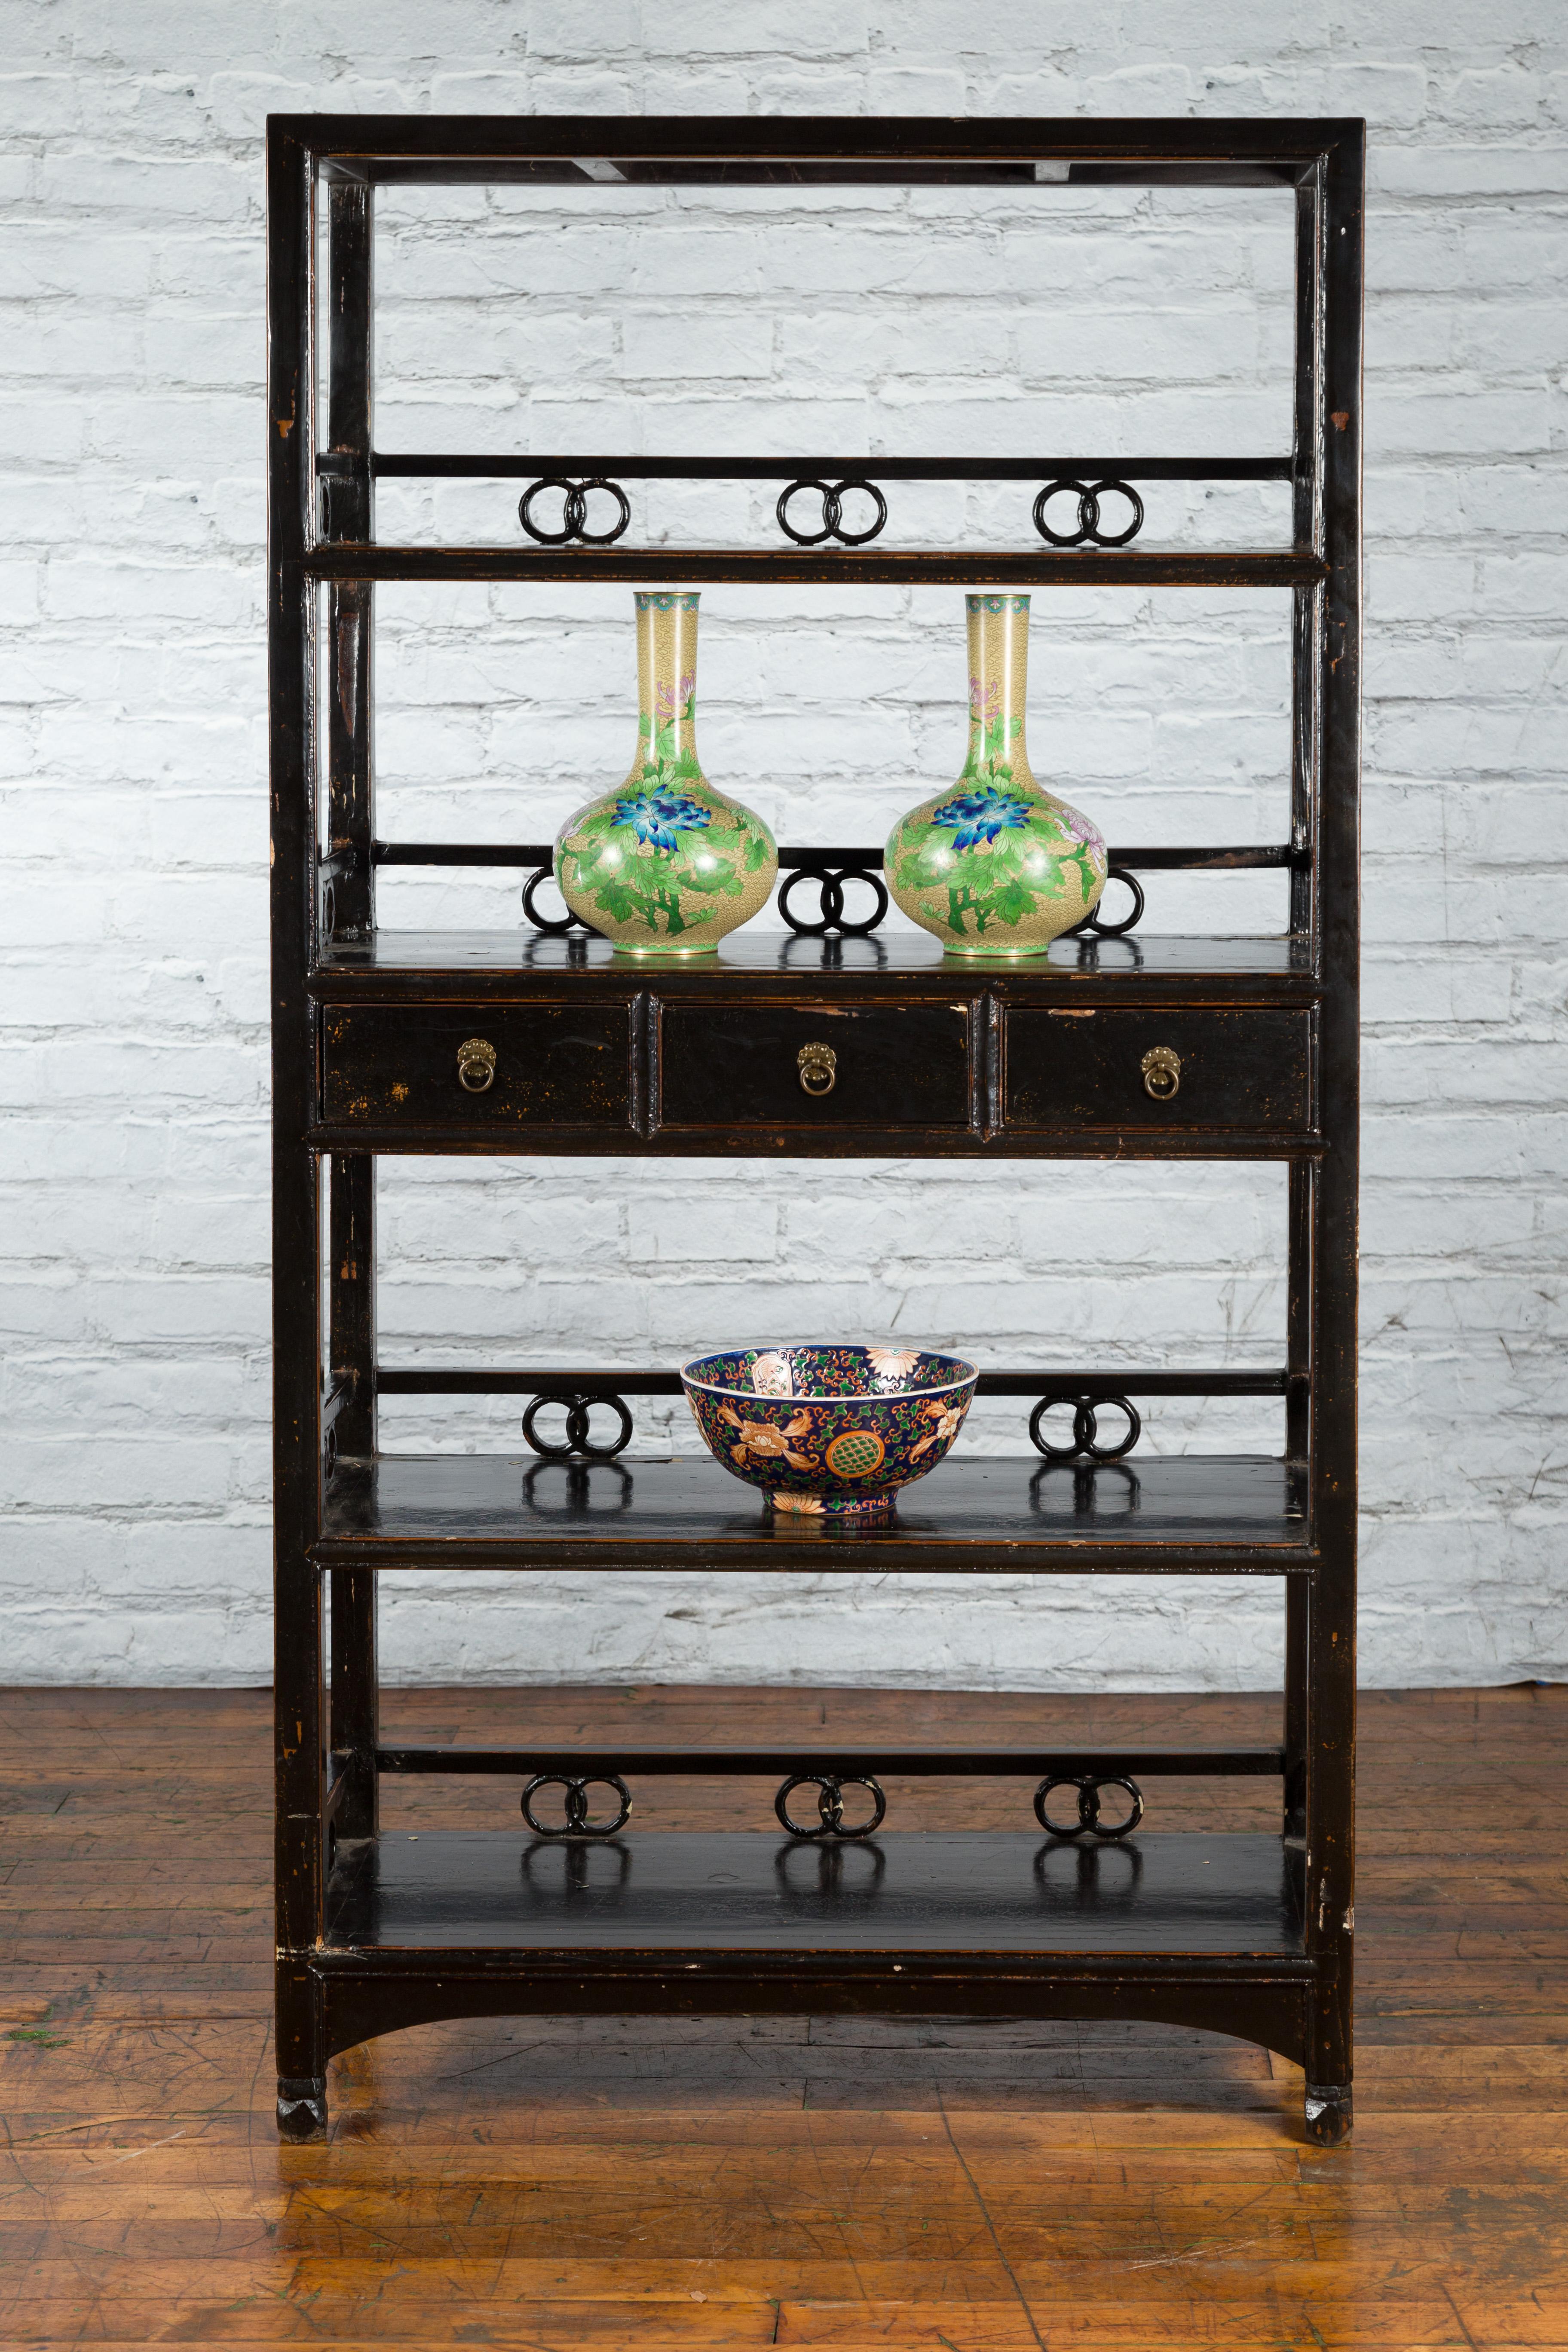 A tall Qing Dynasty period Chinese bookcase from the 19th century, with three drawers, intertwined rings and dark brown / black patina. Created in China during the Qing Dynasty, this tall bookcase features a linear silhouette contrasted by a perfect